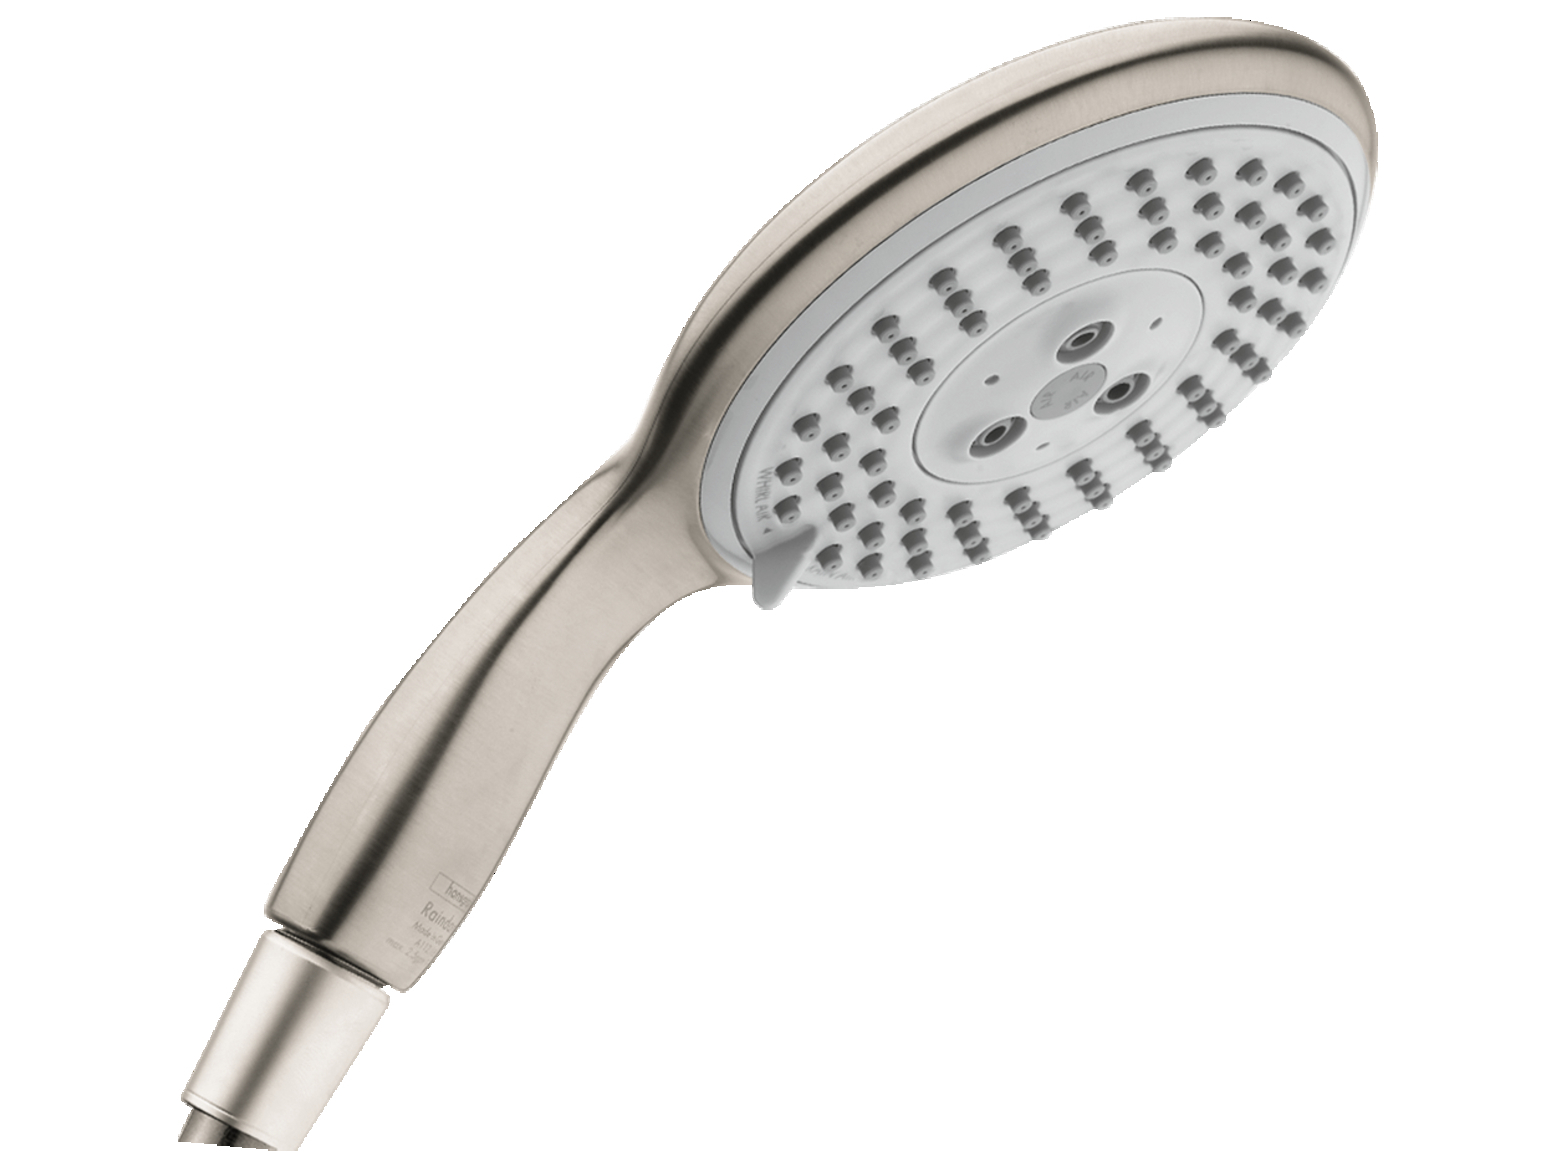 ROHL Handshower Holder with Outlet for Shower Arm Connection